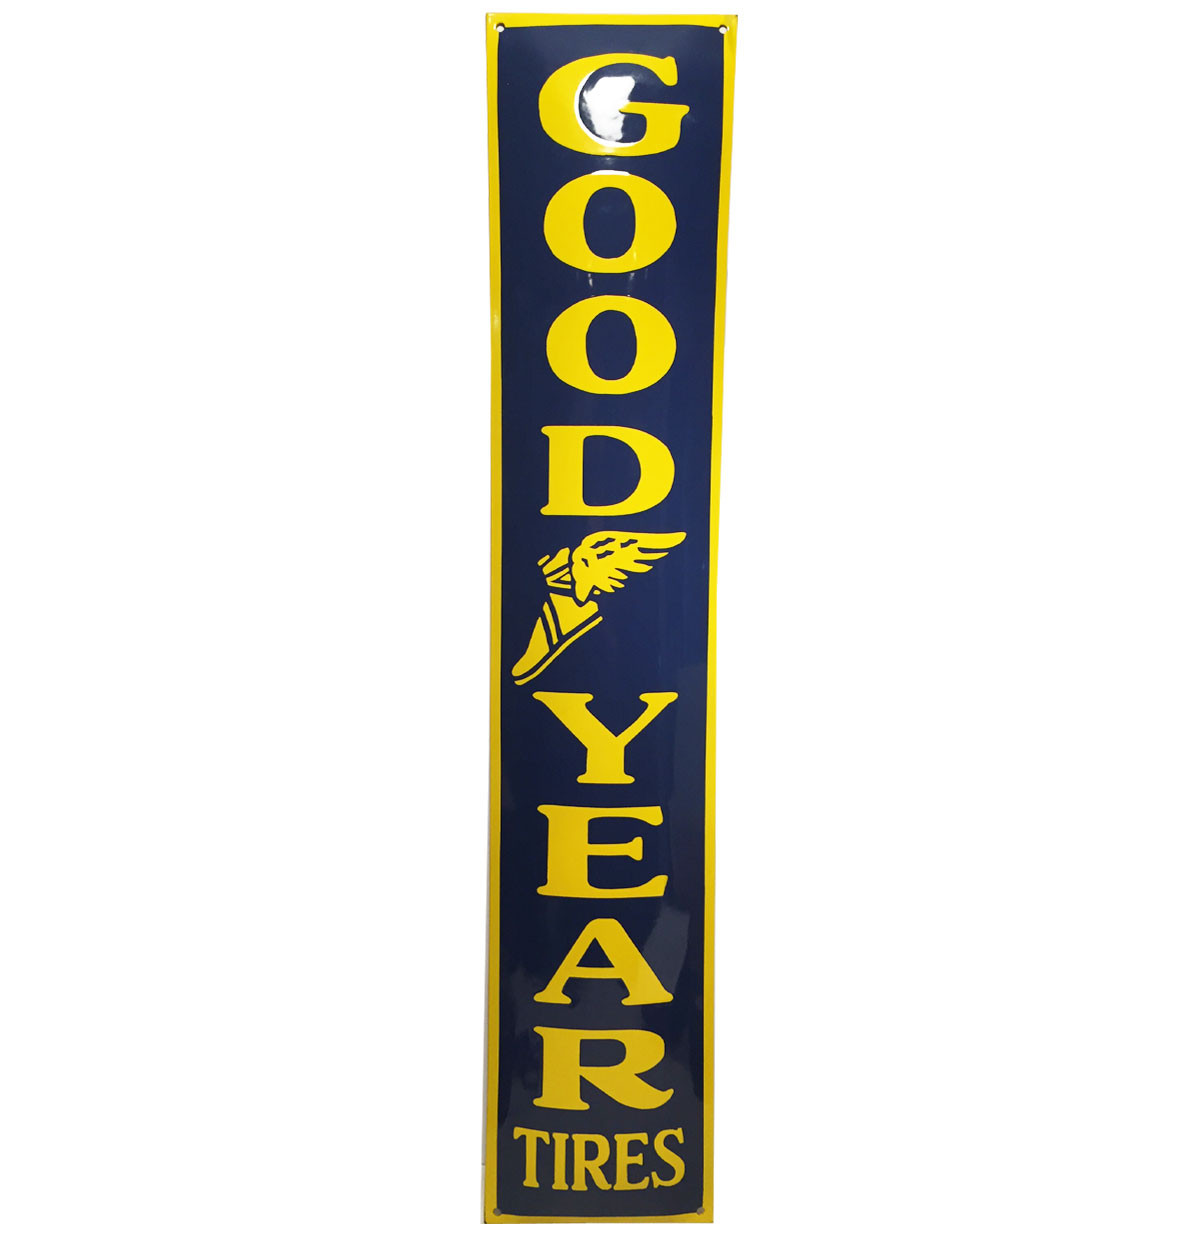 GoodYear Tires Emaille Bord 100 x 20 cm